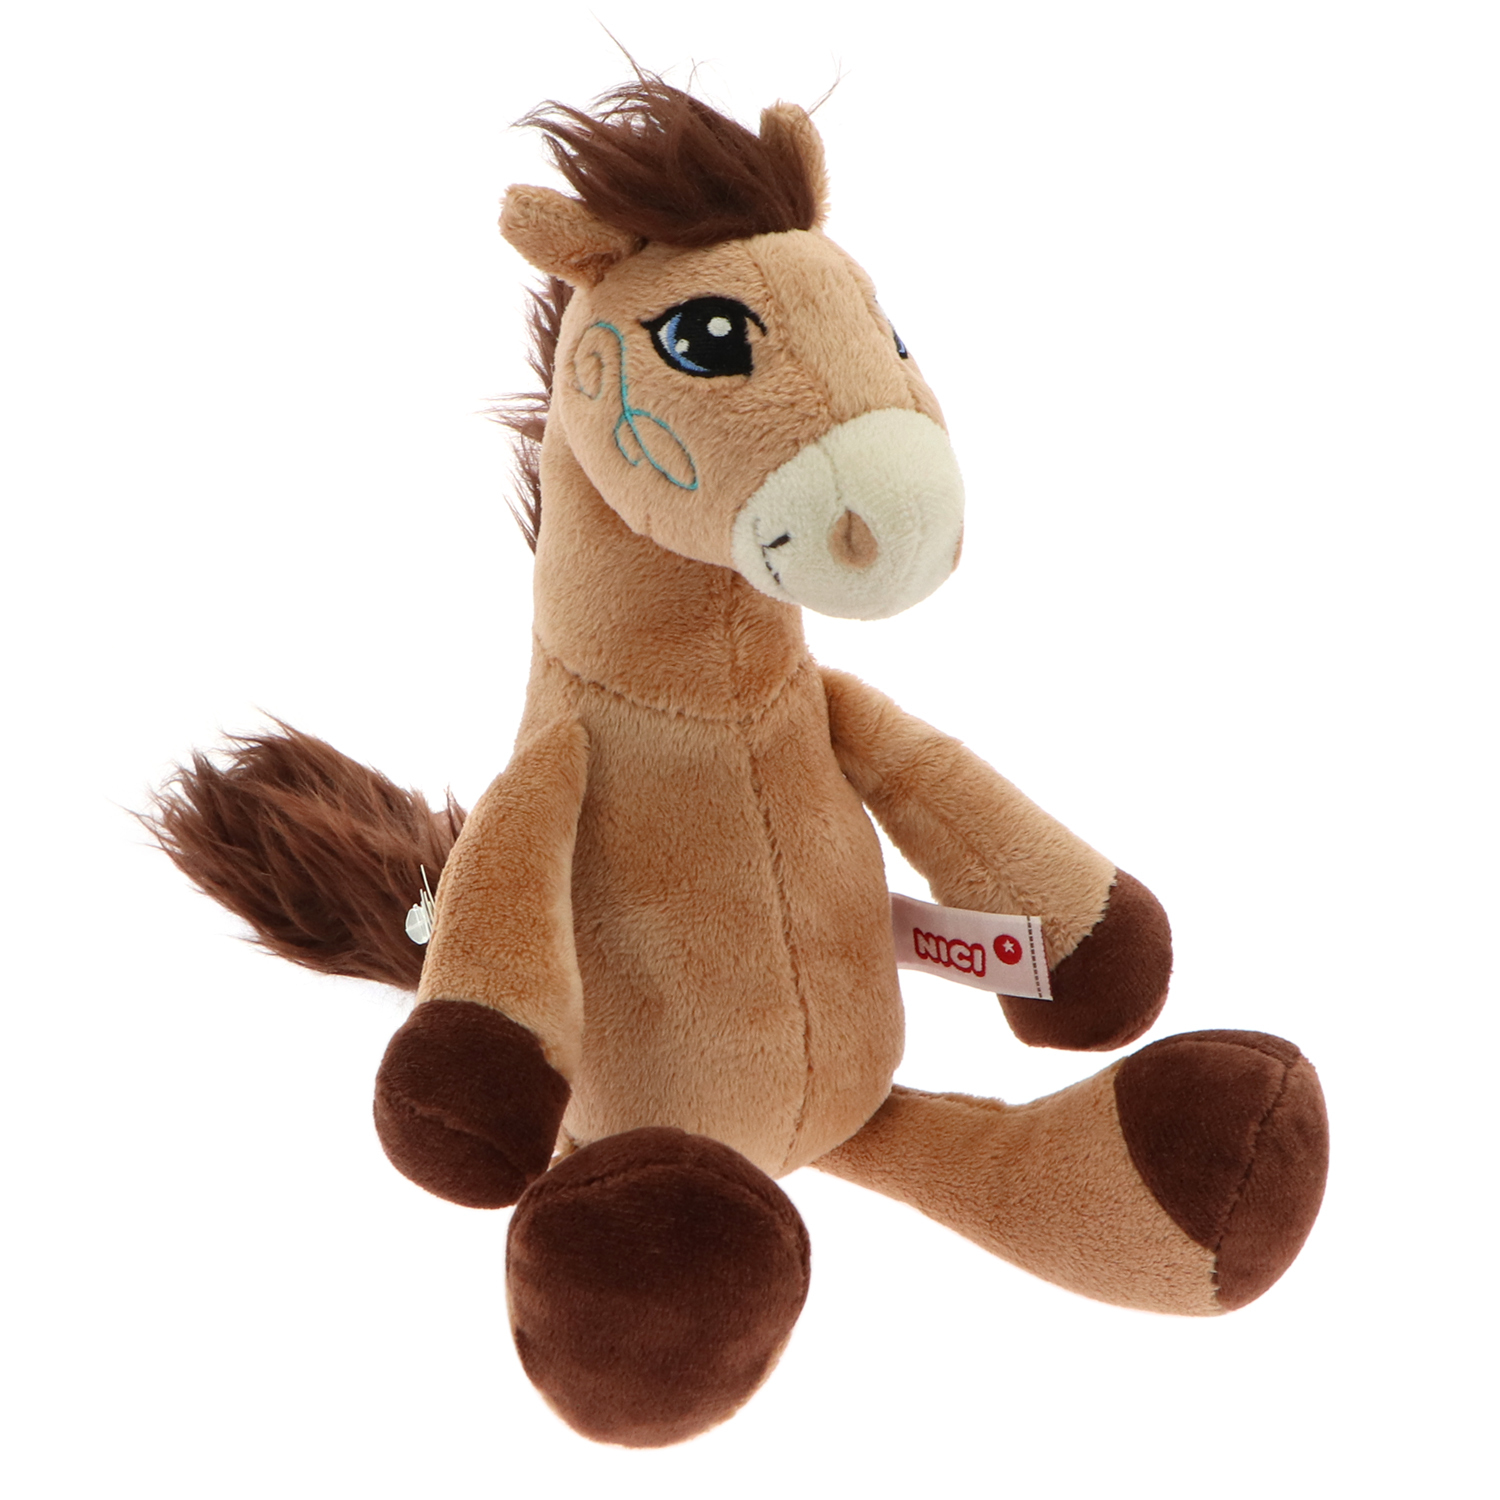 NICI Horse Moonlight Brown Stuffed Animal 10 inches 25cm - $26.00